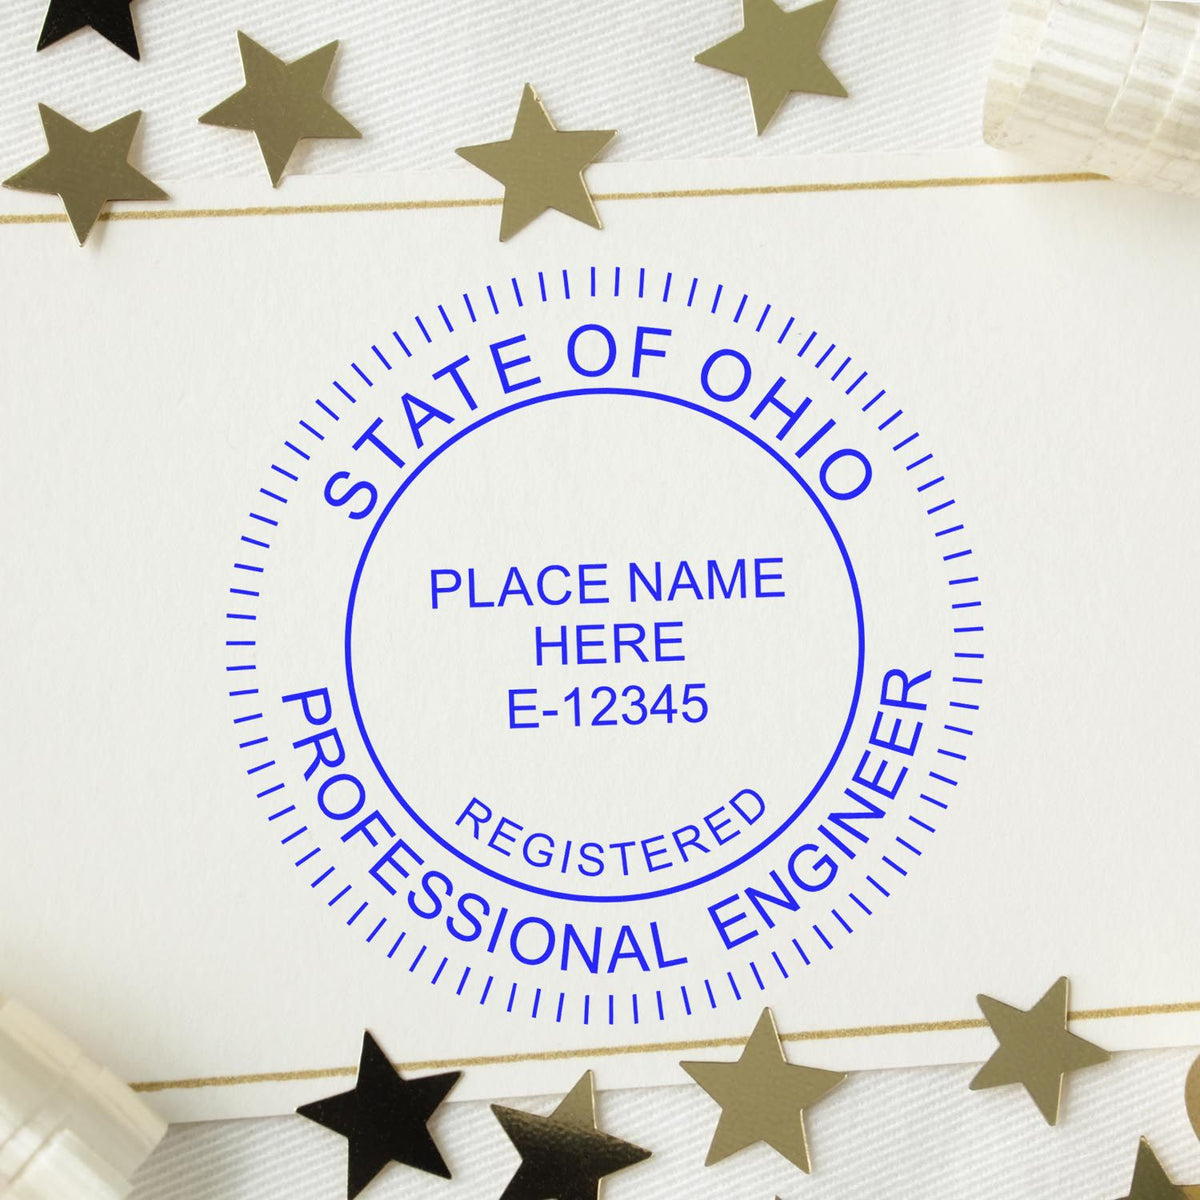 The Digital Ohio PE Stamp and Electronic Seal for Ohio Engineer stamp impression comes to life with a crisp, detailed photo on paper - showcasing true professional quality.